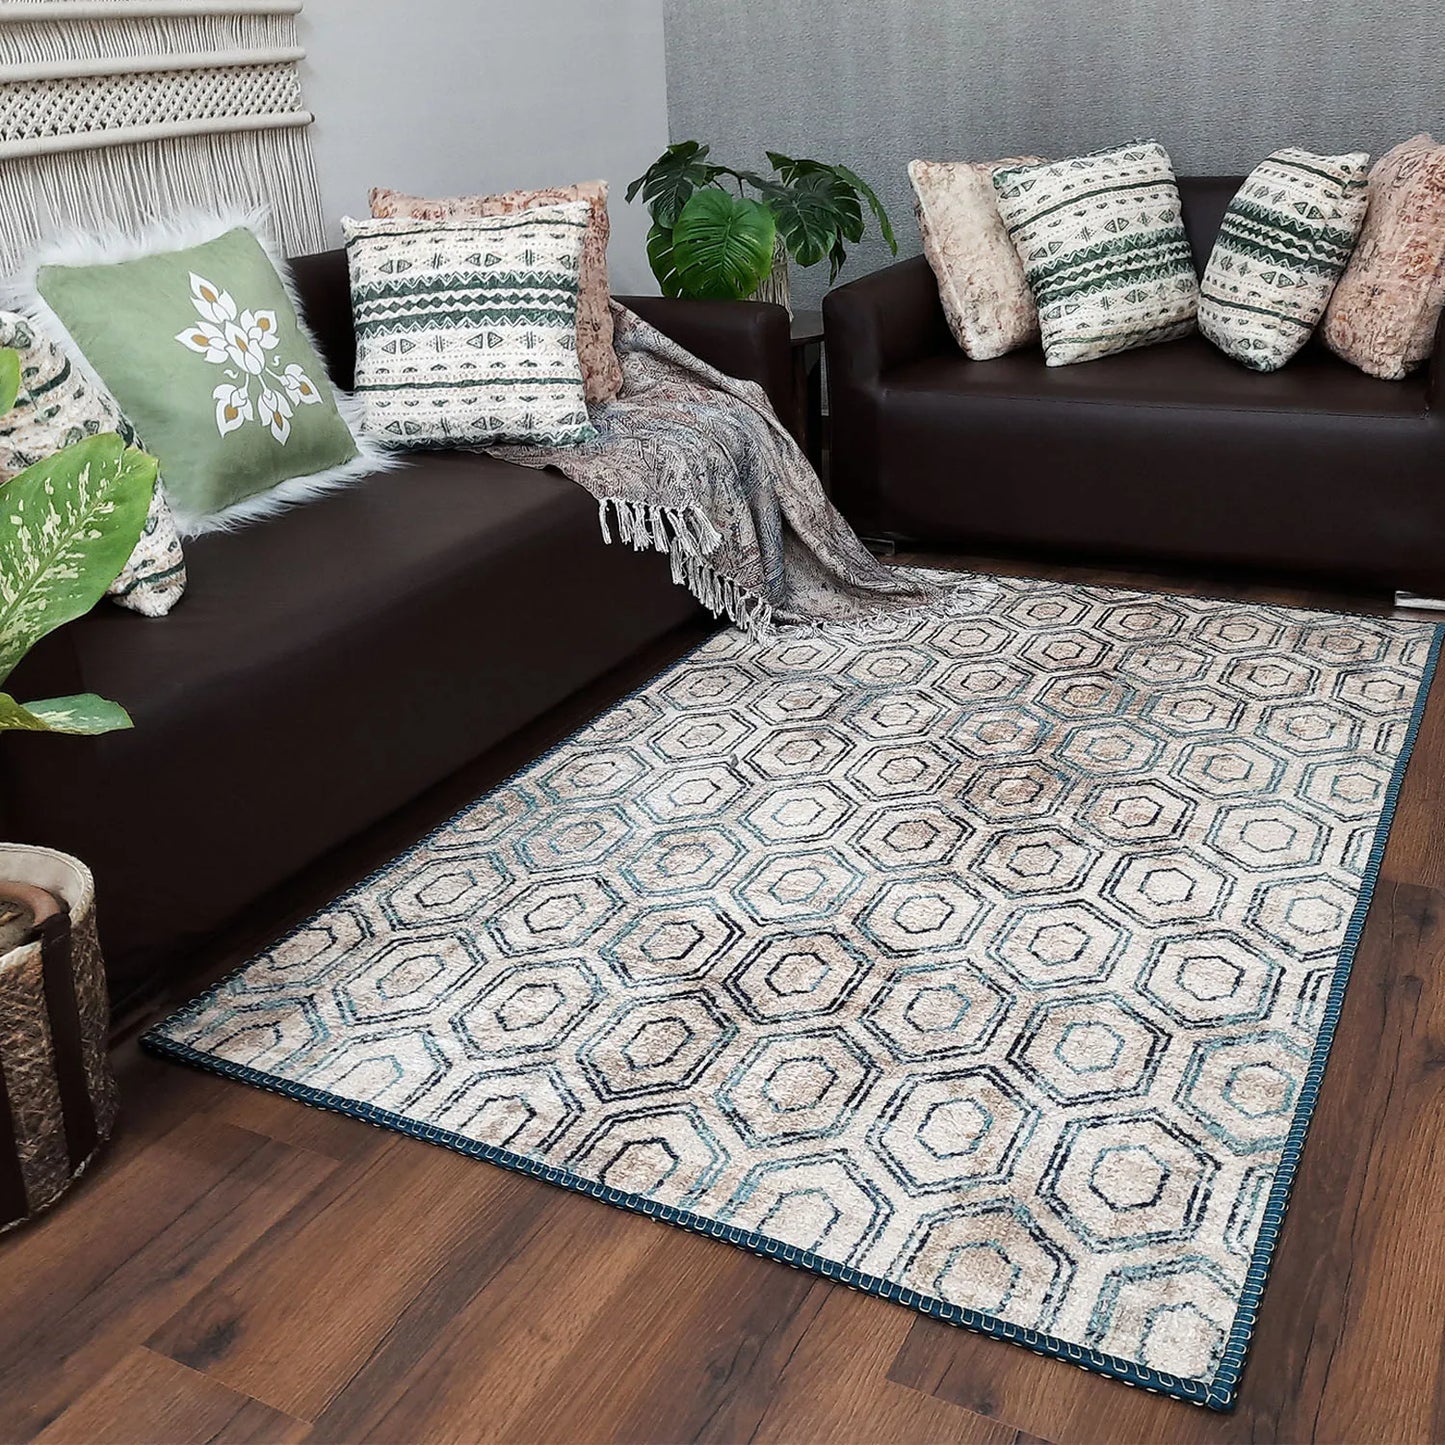 Avioni Home Faux Silk Carpet for Your Living Room | Modern Design | Luxurious, Durable and Washable | SeaBird Collection